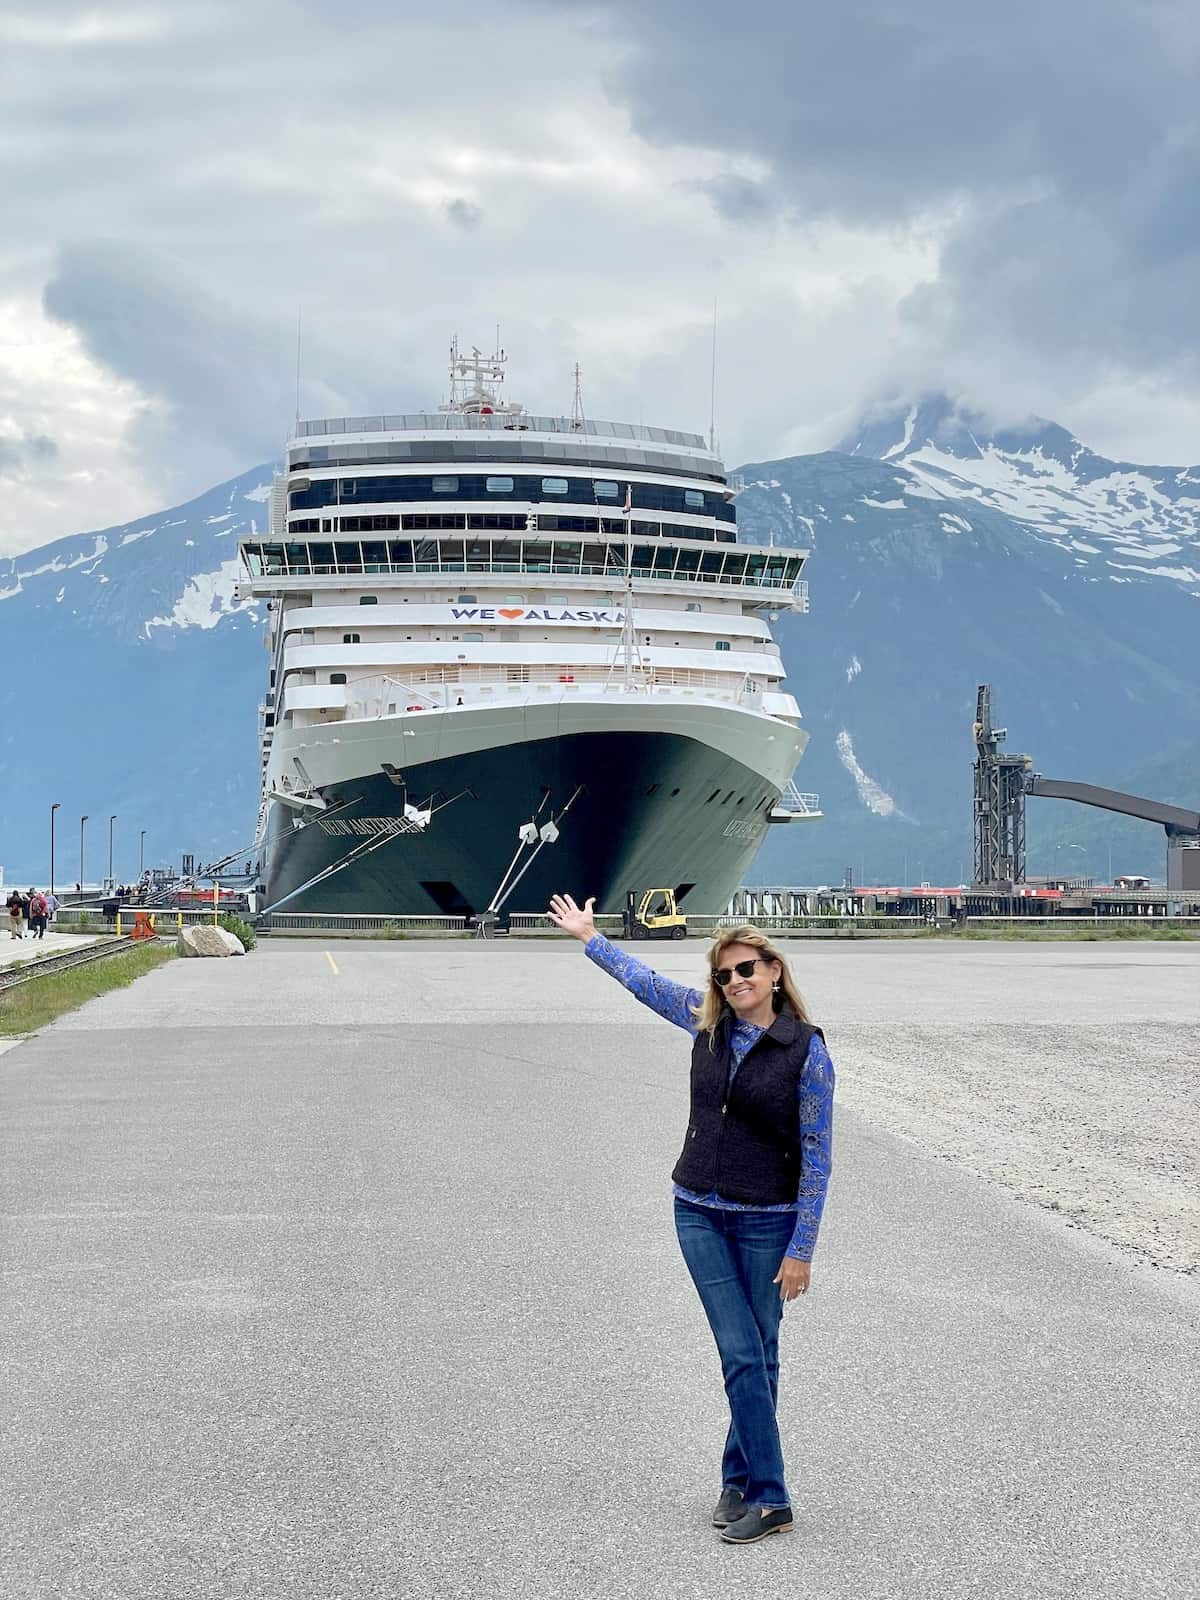 Woman in front of cruise ship.